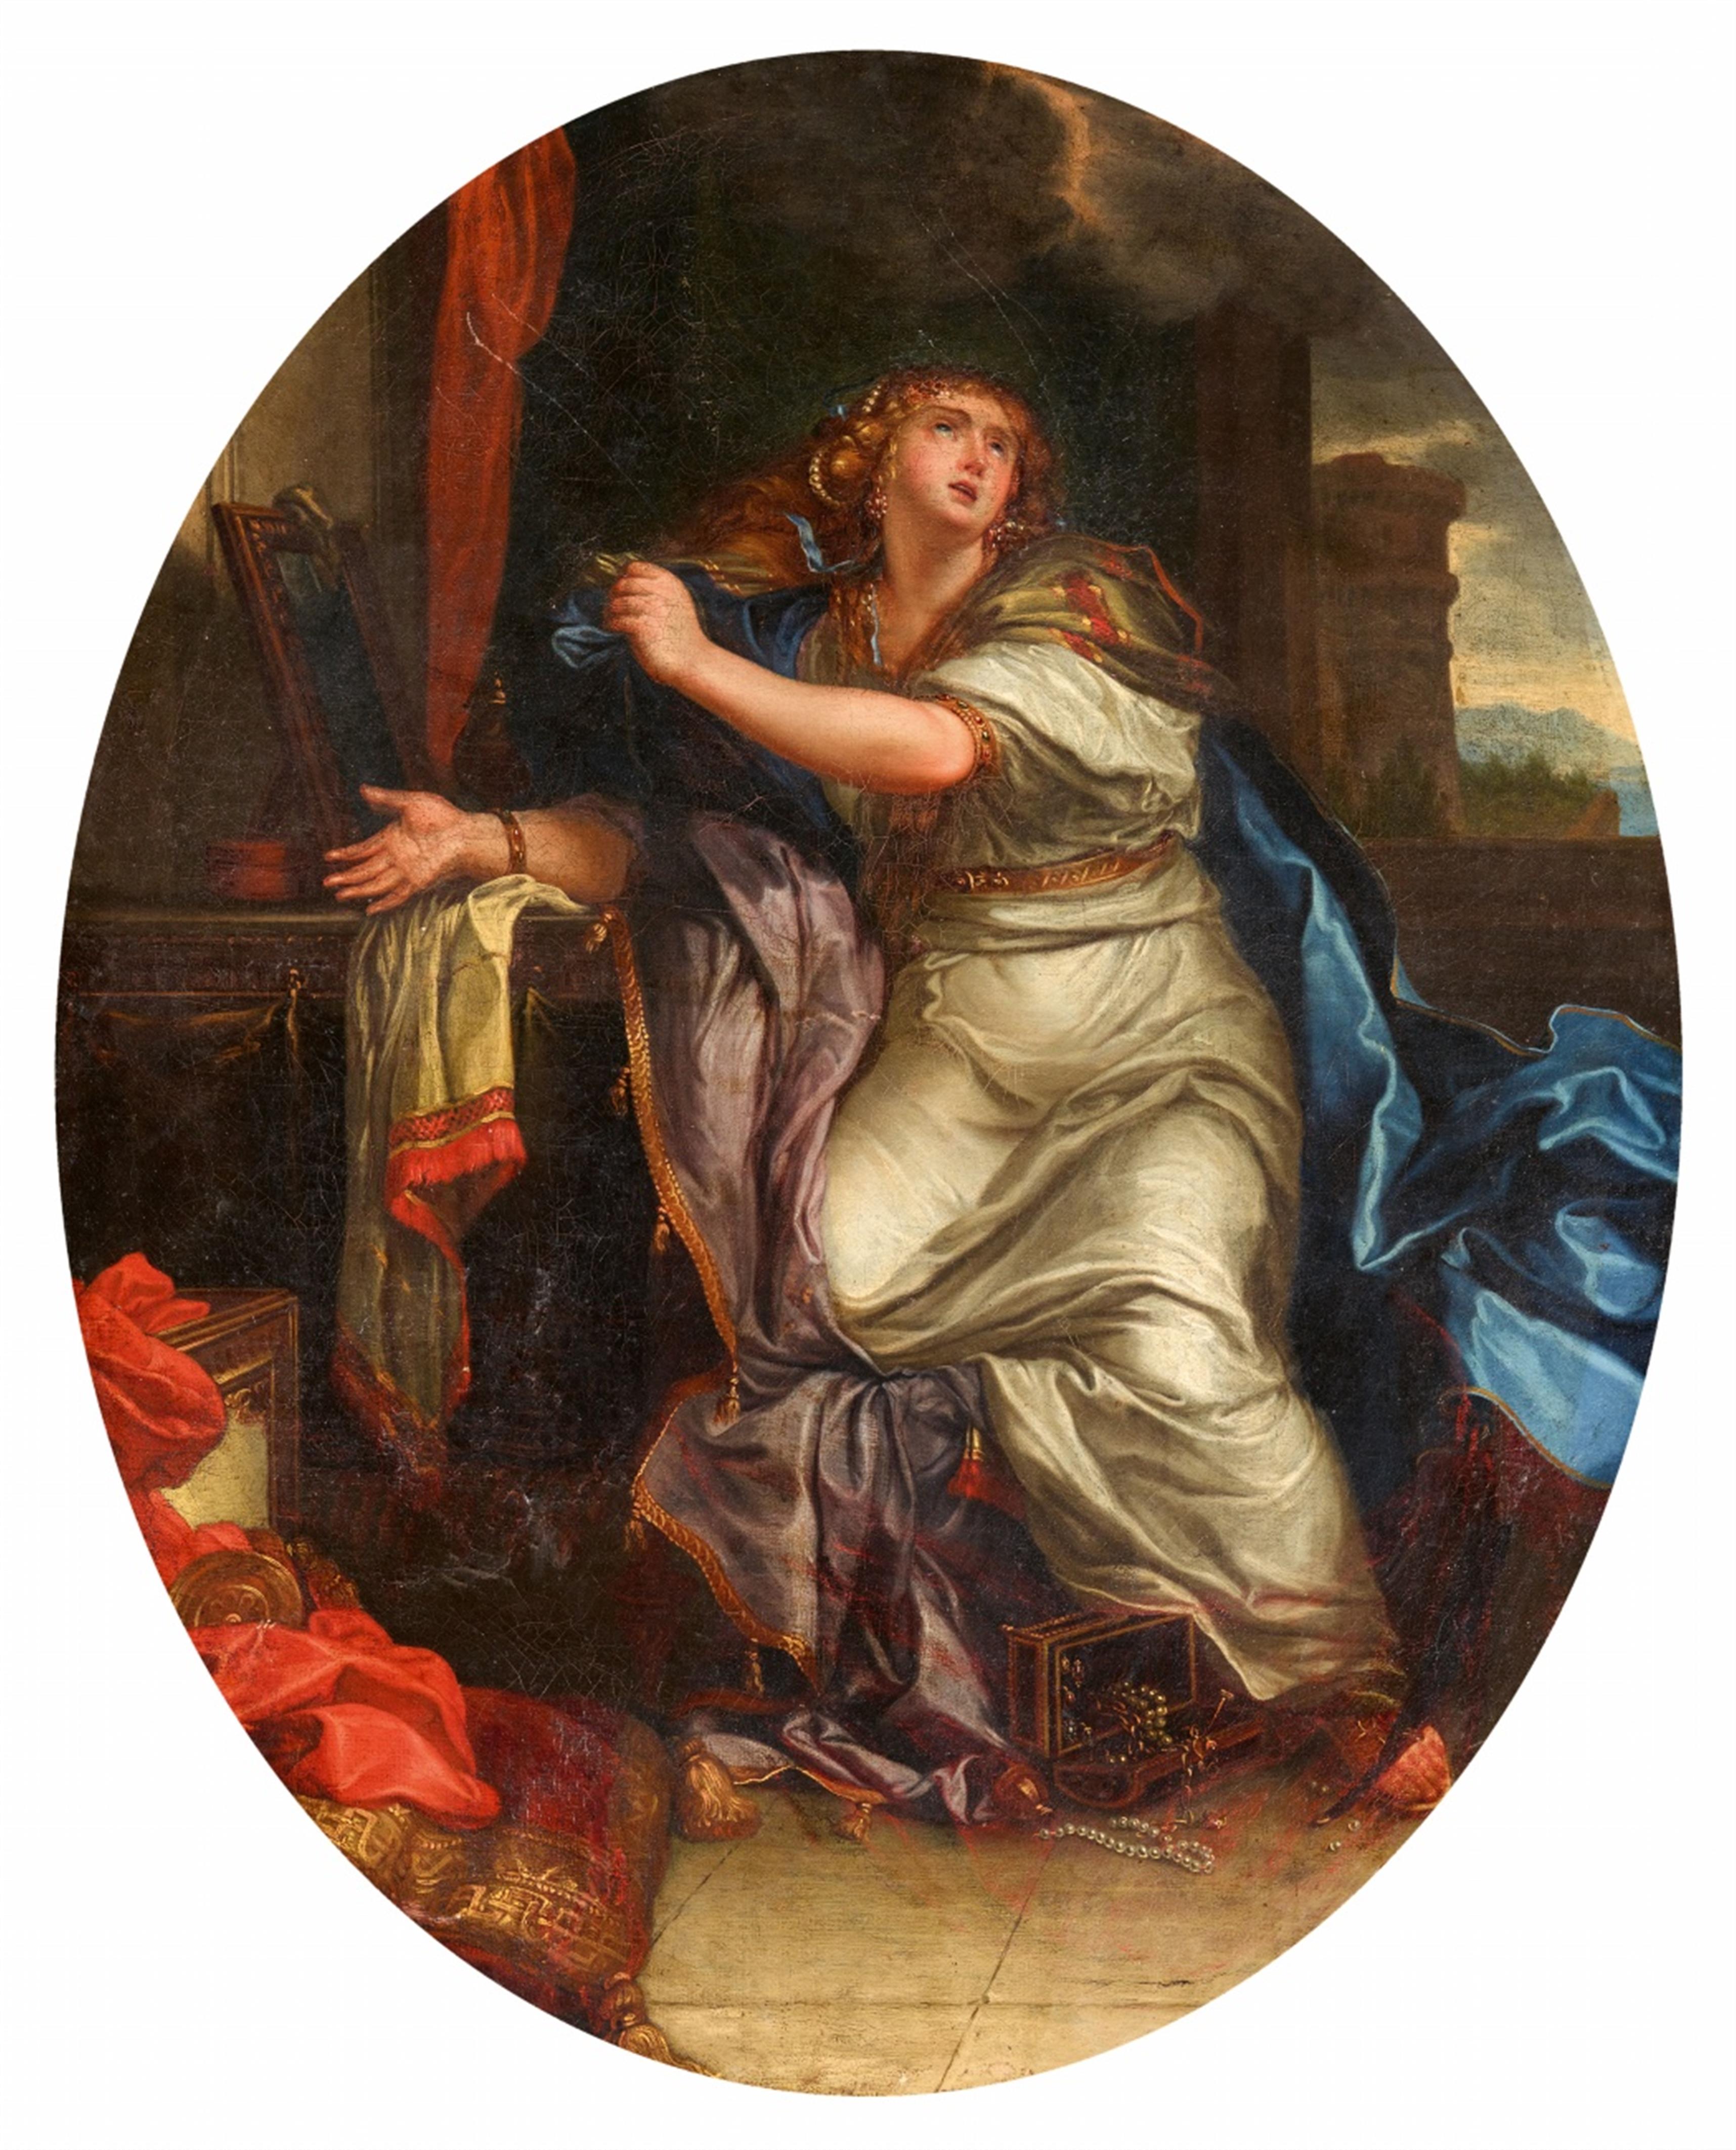 Perrier - The Penitent Mary Magdalene - image-1